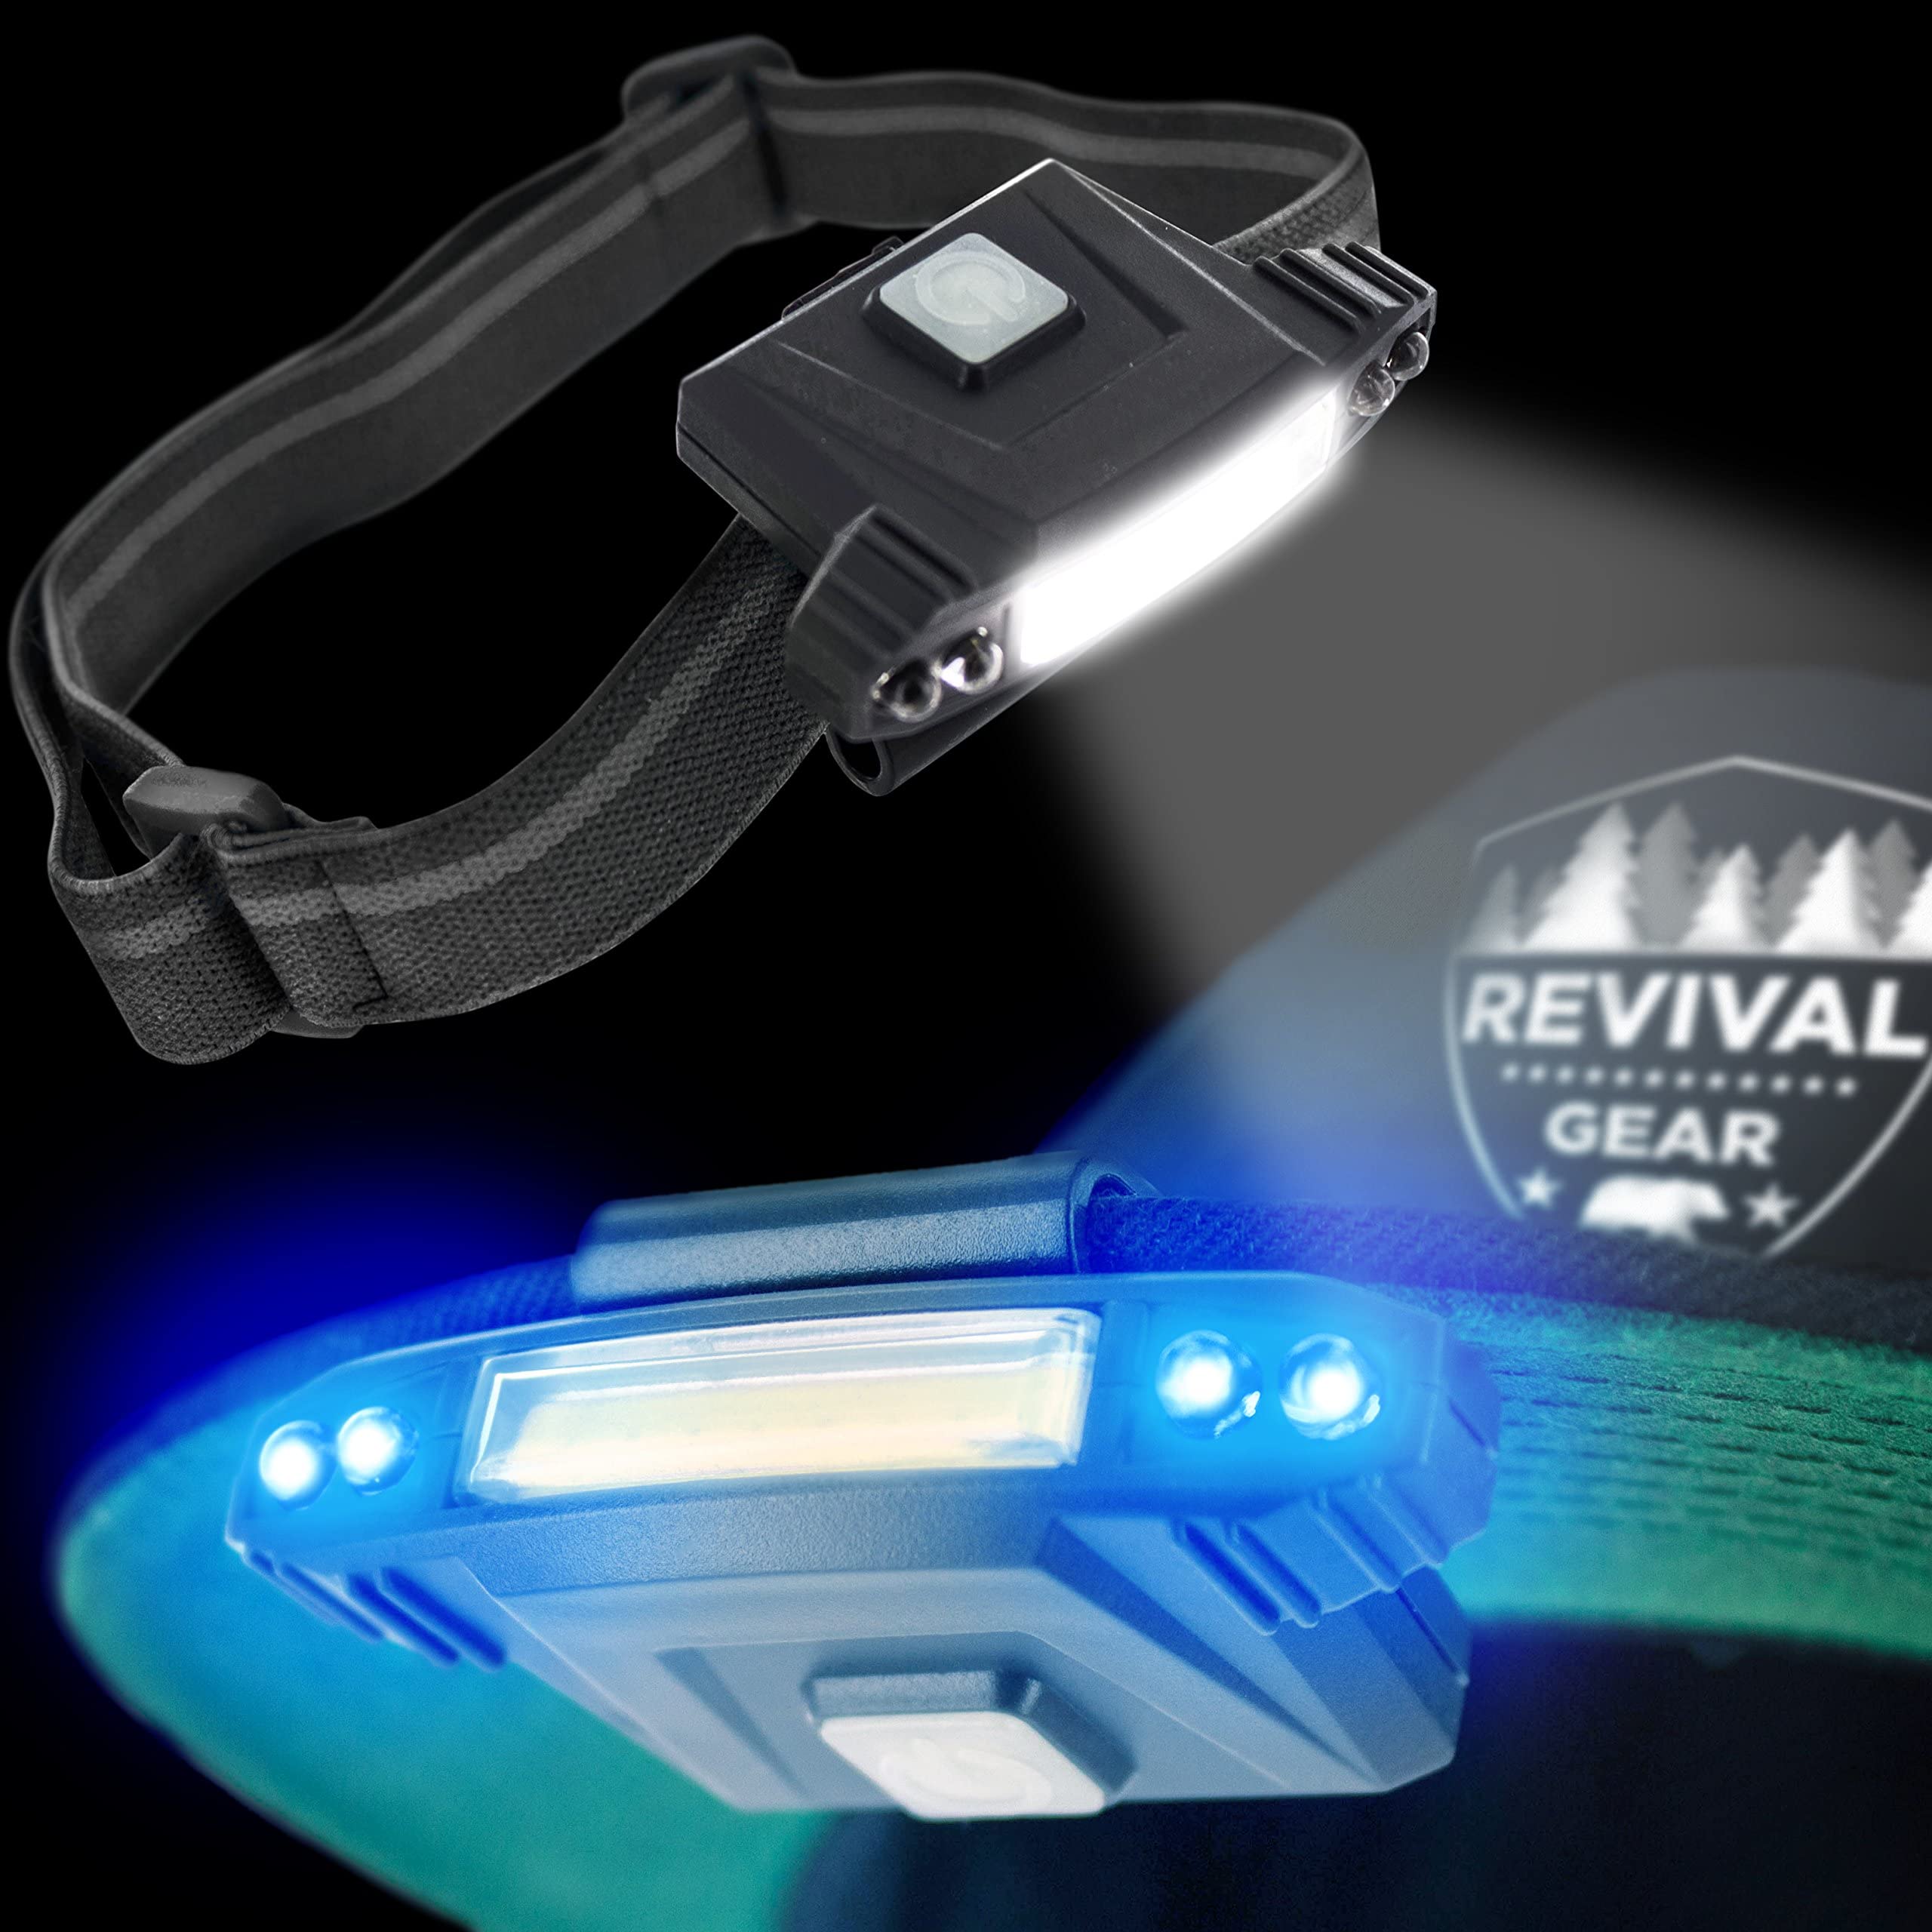 Hat Light Rechargeable LED Headlamp: Head Lamps Strap Clip On Flashlight Headlamps for Hardhat & Hats for Camping, Running, Working Hard Hats, Cycling, Walking, Hiking